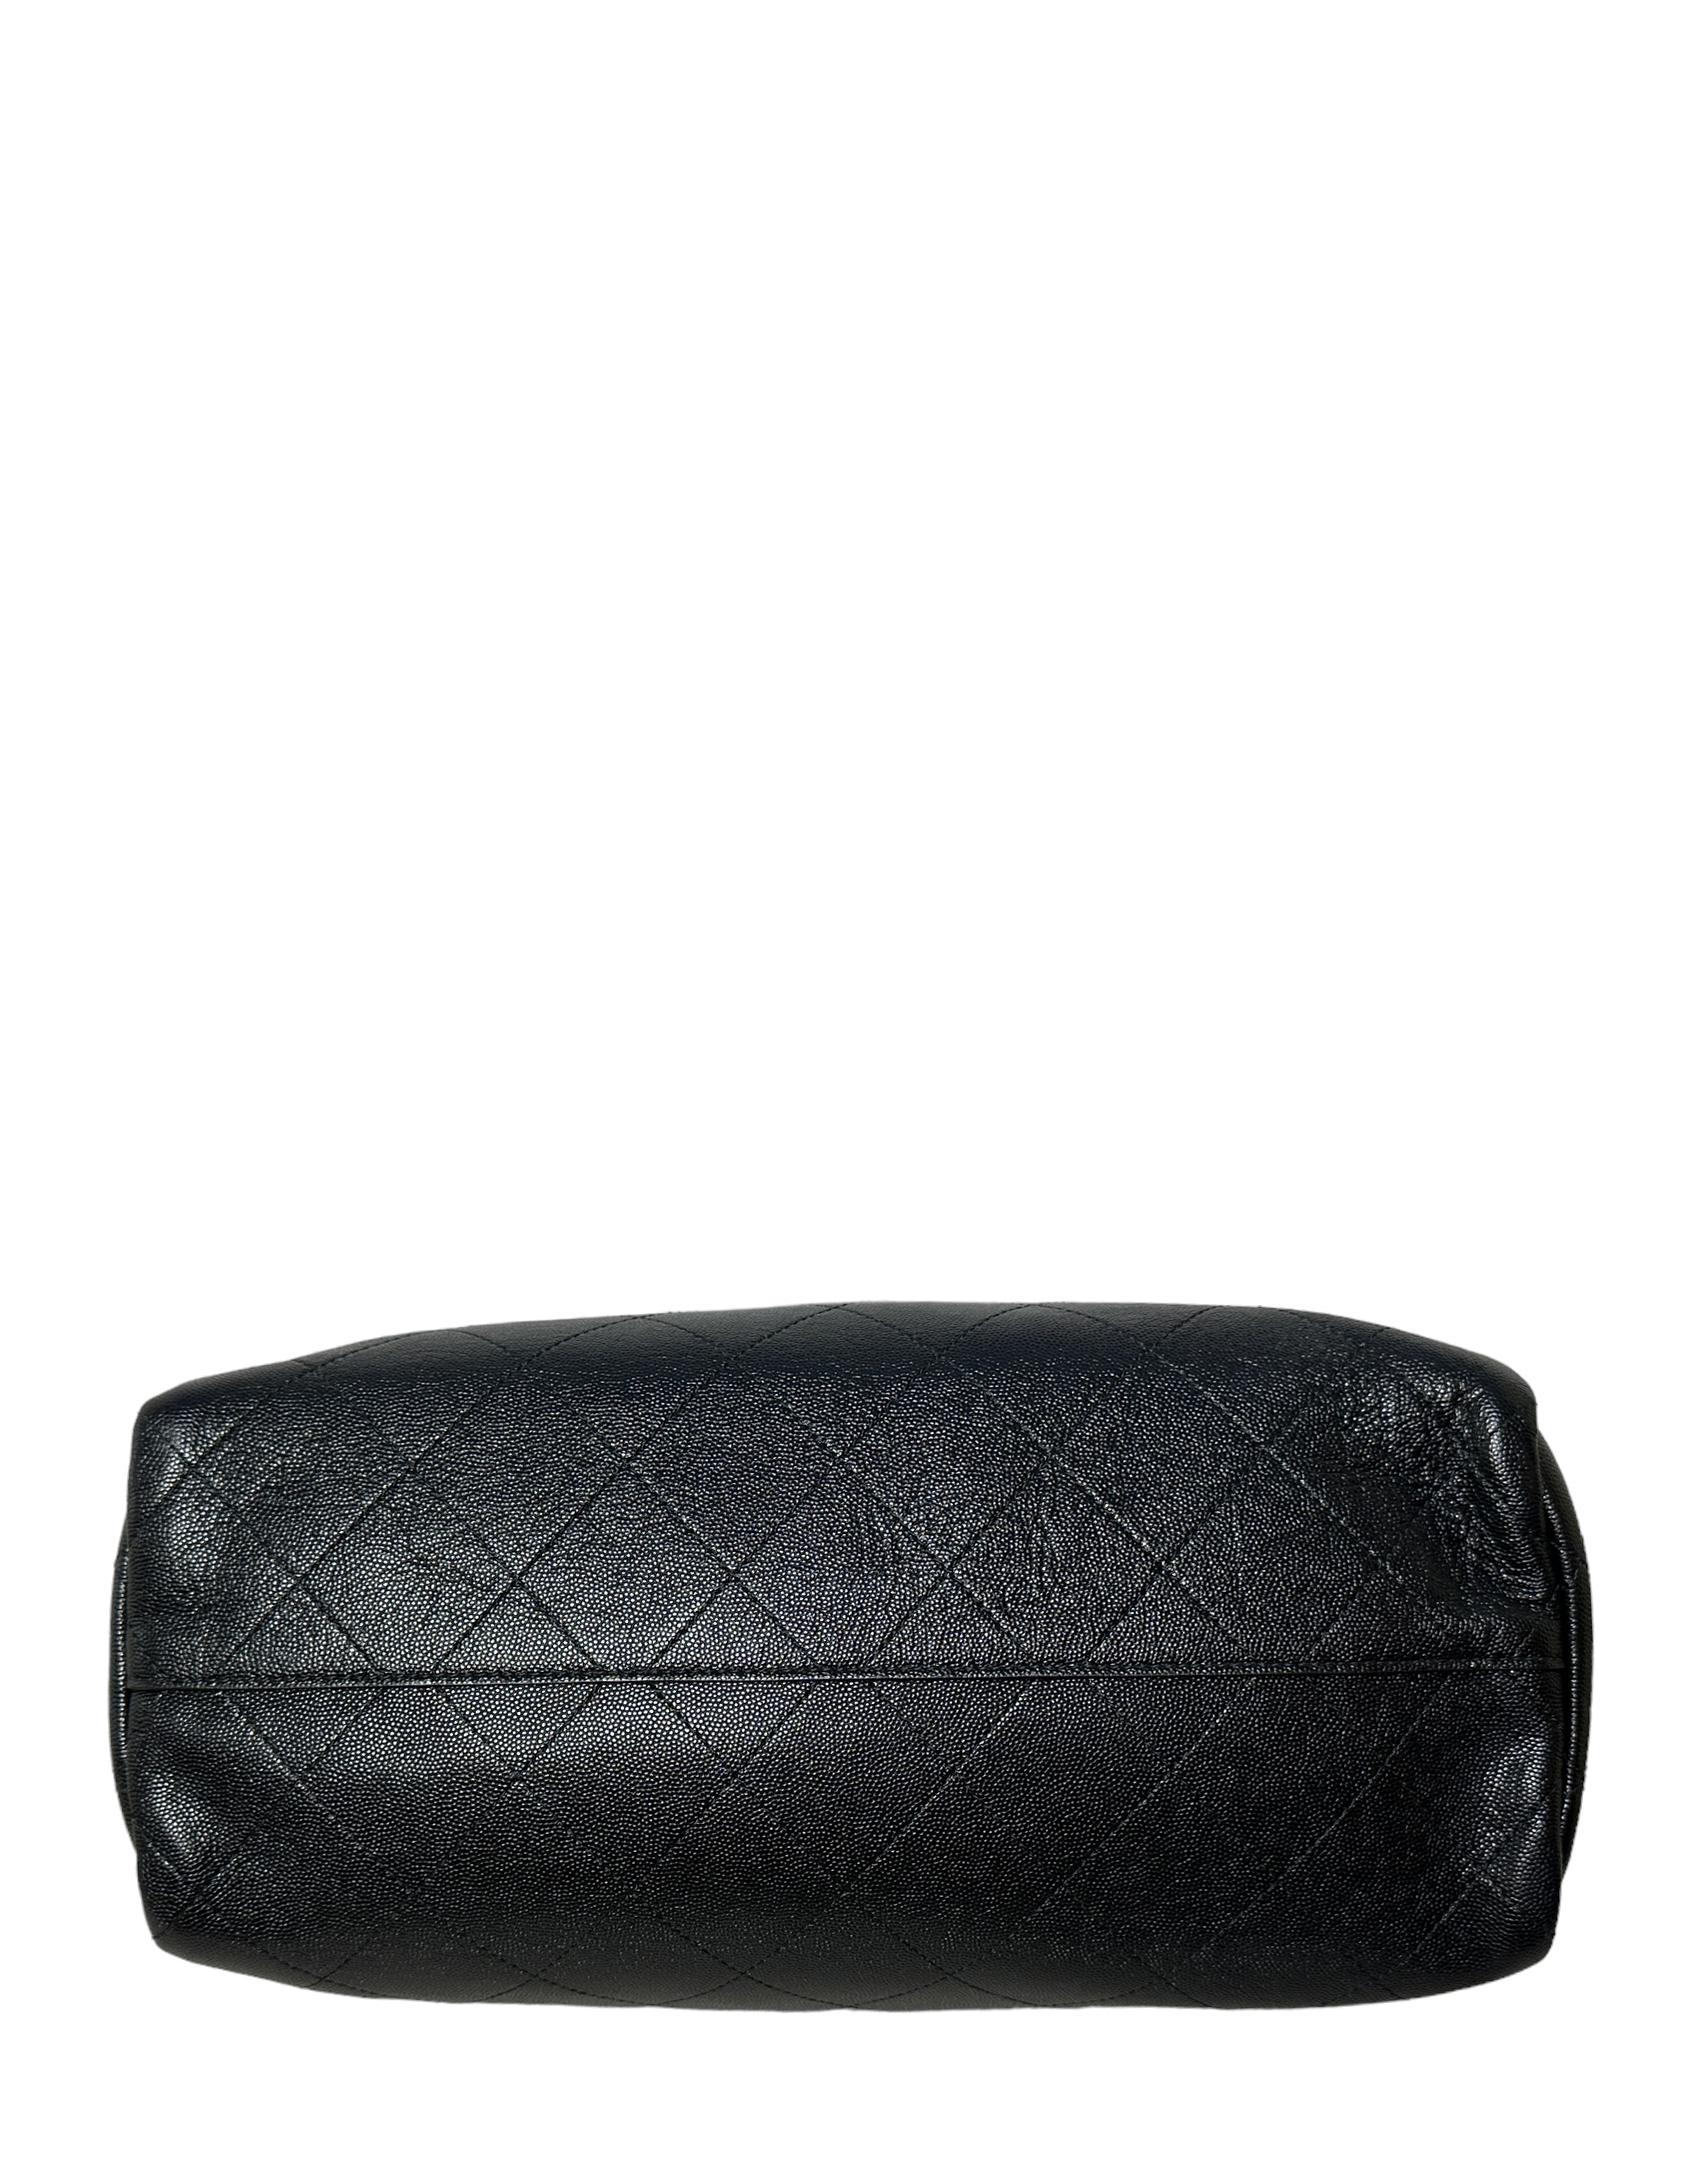 Chanel Black Caviar Leather Quilted CC Shopping Tote Bag For Sale 3